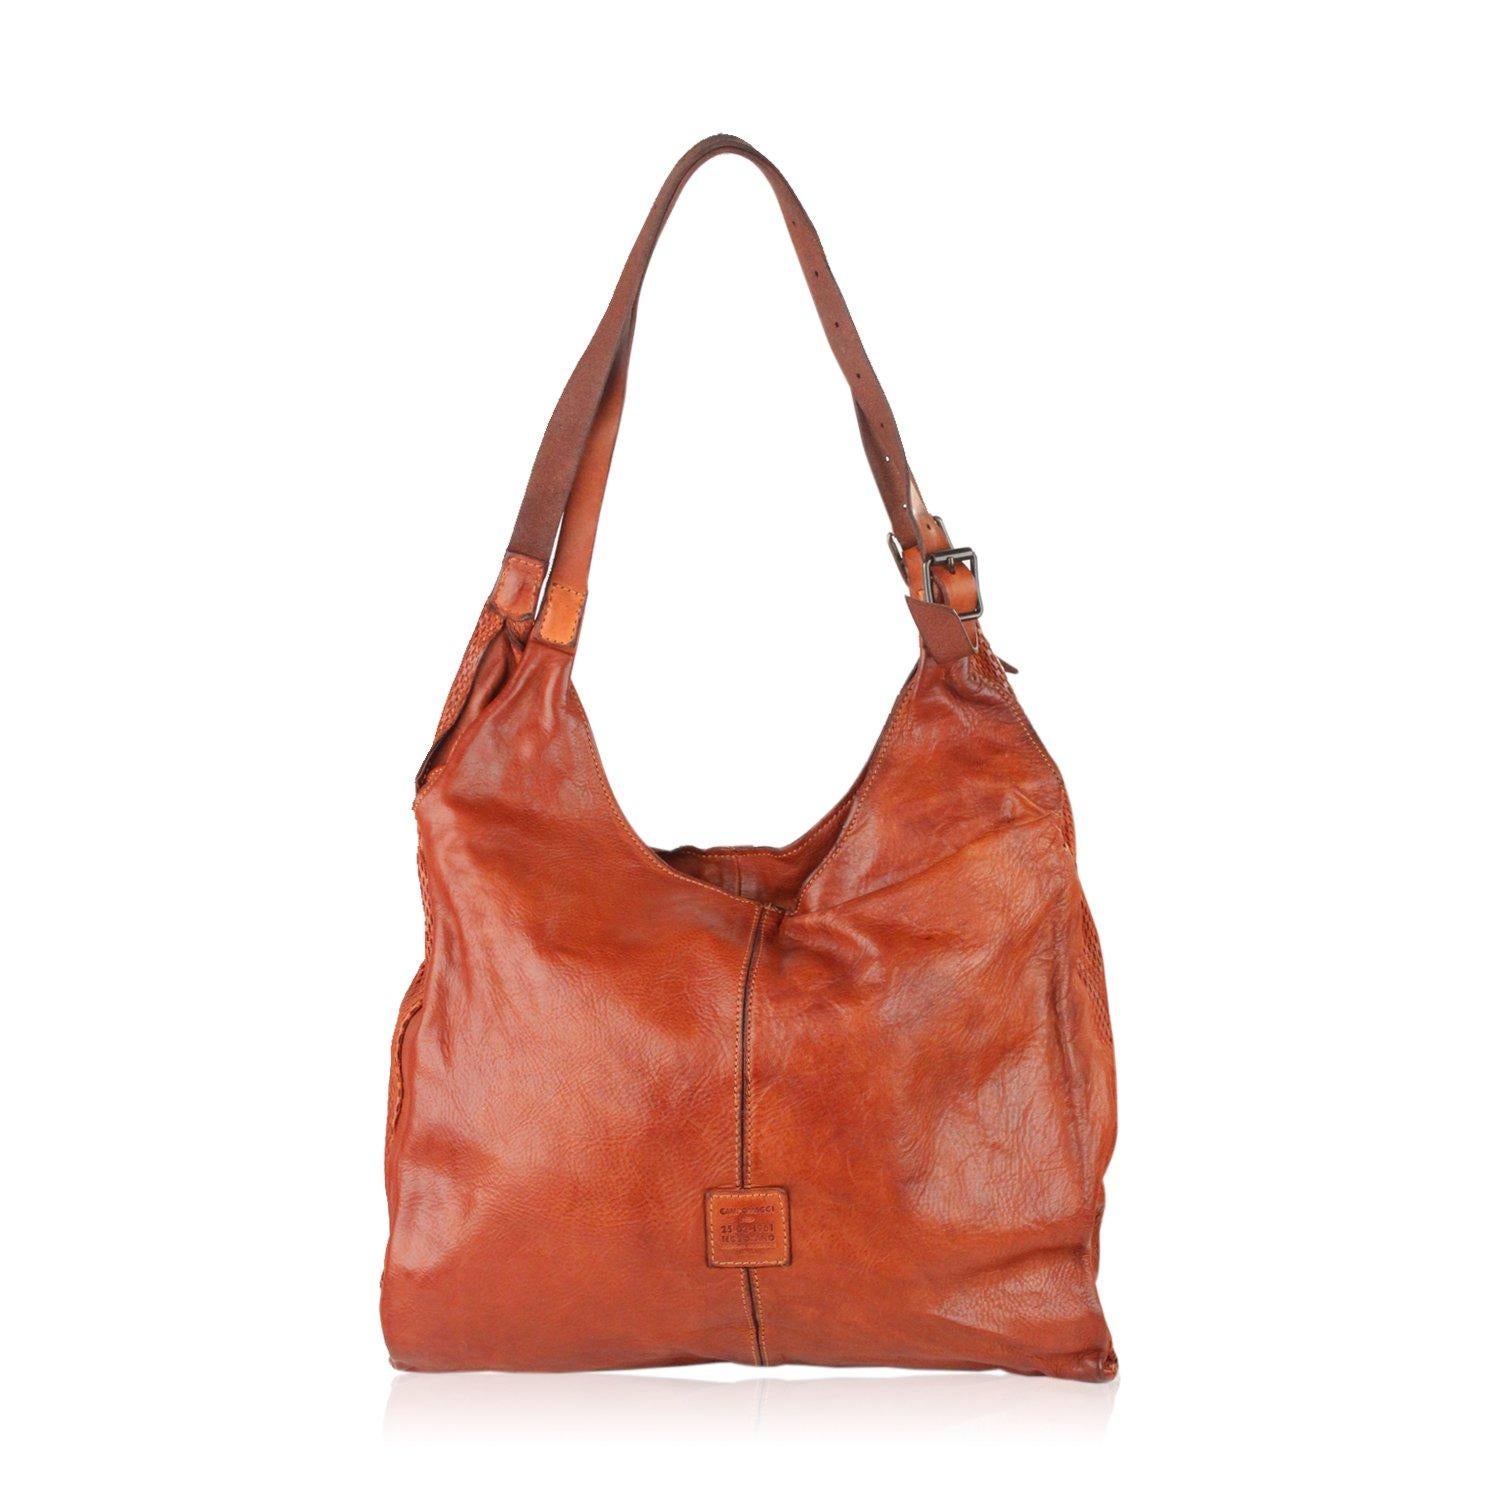 MATERIAL: Leather COLOR: Brown MODEL: Hobo GENDER: Women SIZE: Medium Condition CONDITION DETAILS: B :GOOD CONDITION - Some light wear of use - some darkness on leather due to normal use (especially on the upper part of the bag), some light pilling